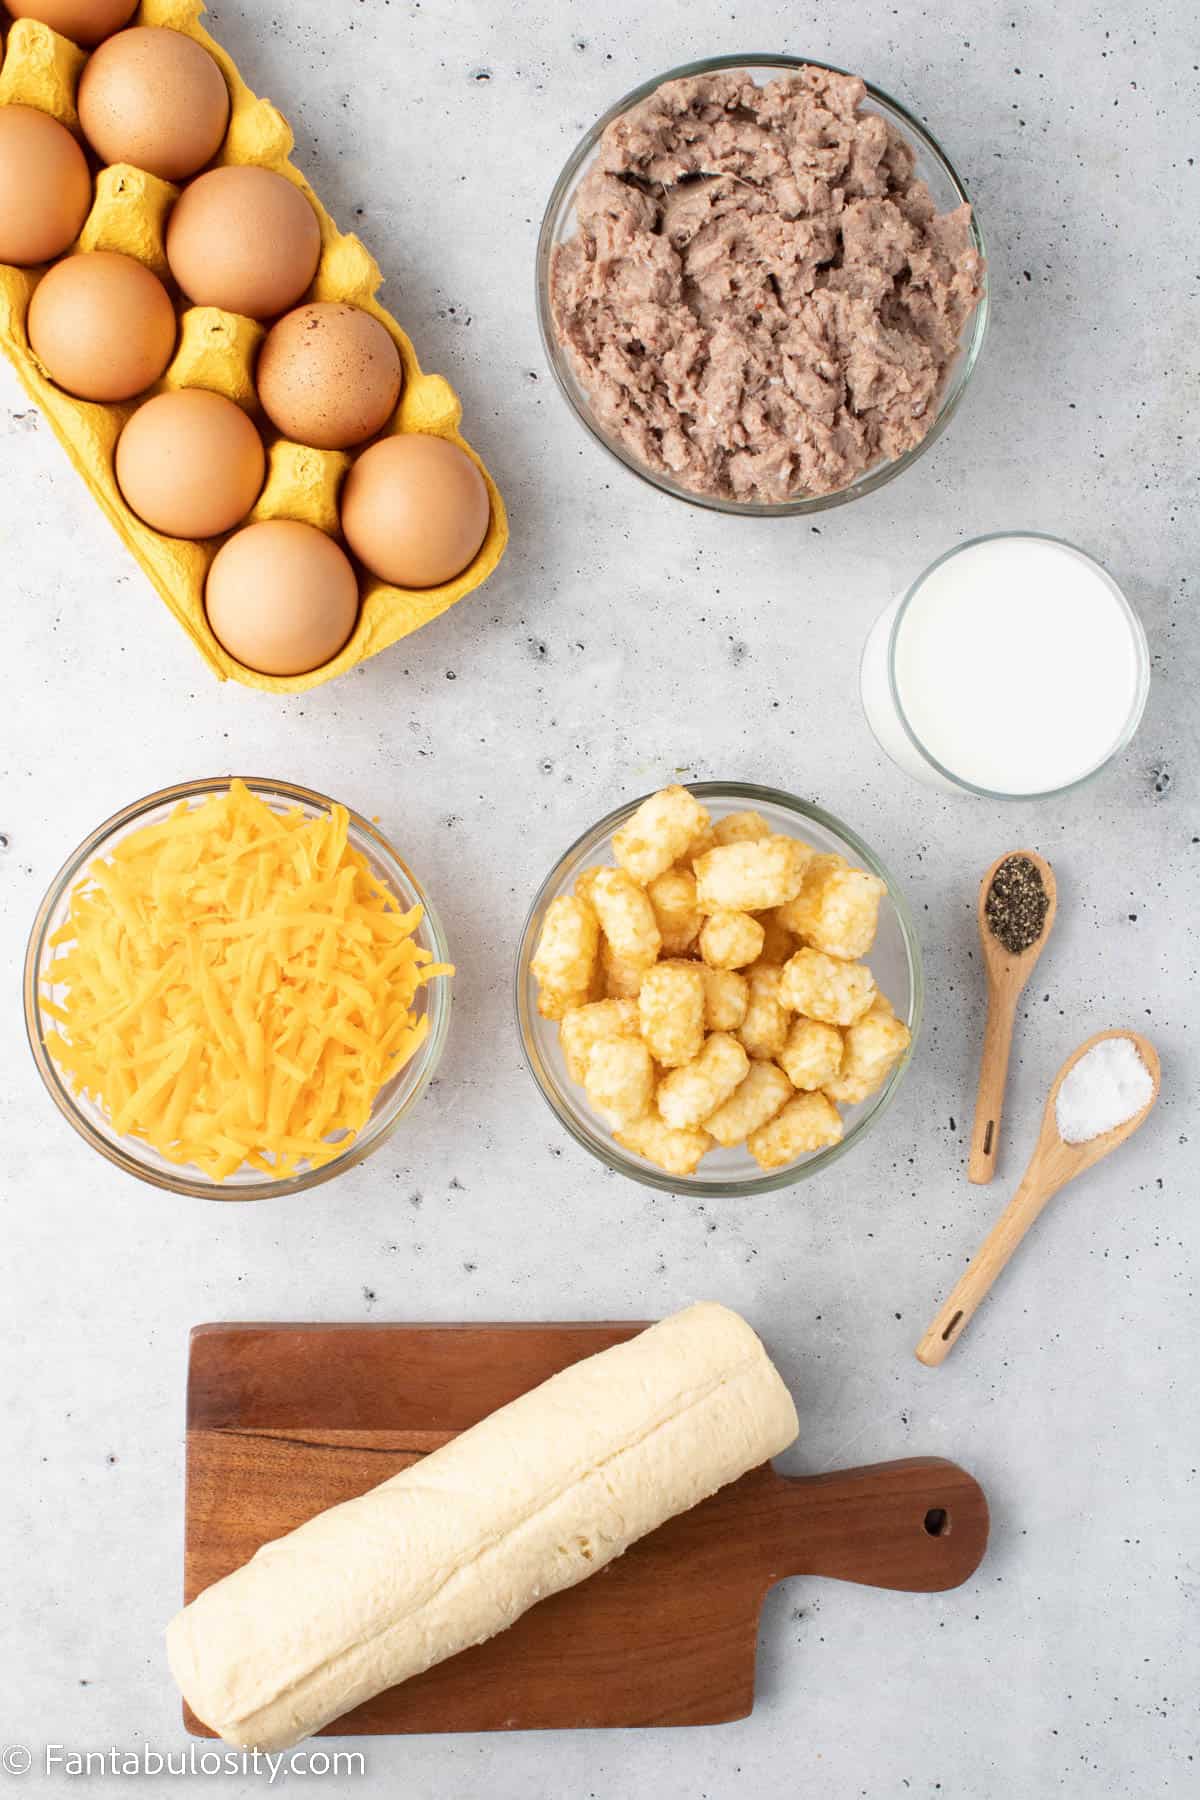 Ingredients for sausage and egg casserole